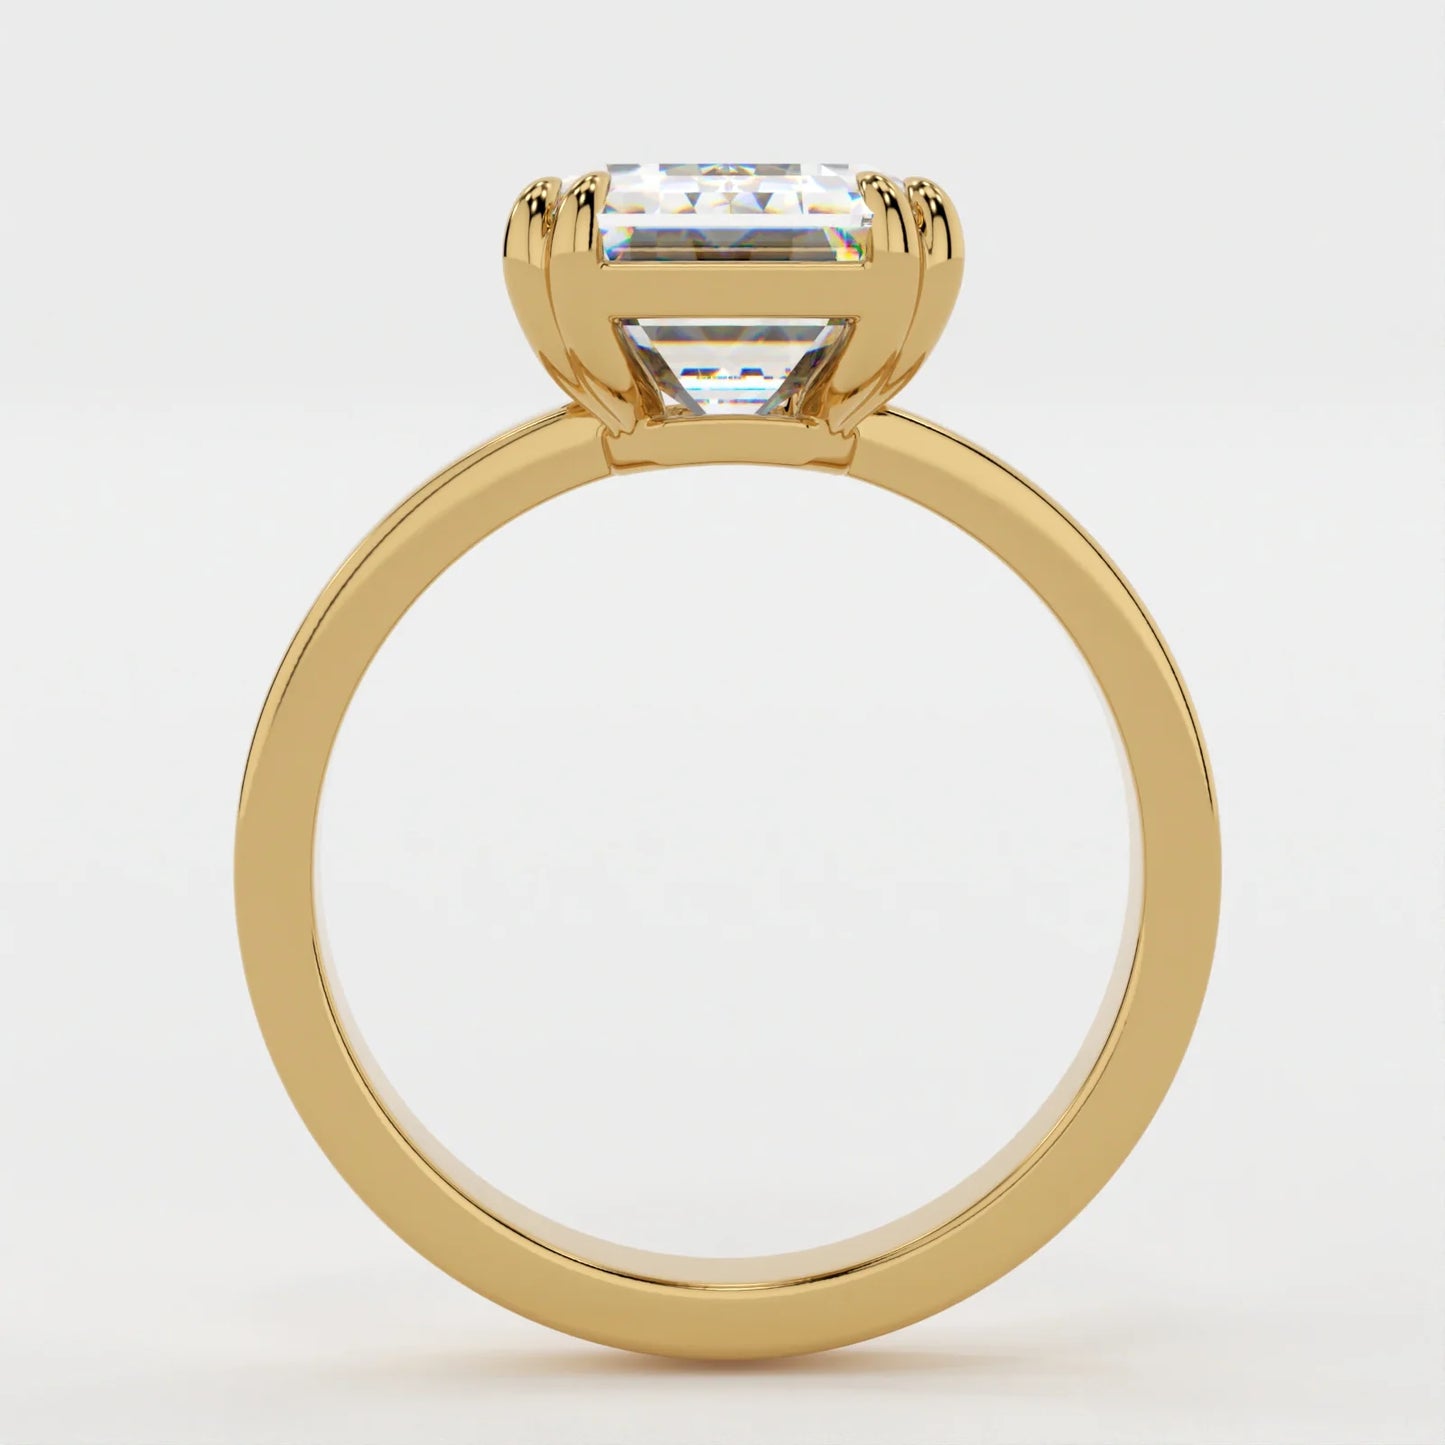 4 Carat Emerald Cut Moissanite Diamond Engagement Ring with a Squared Off Solitaire Band